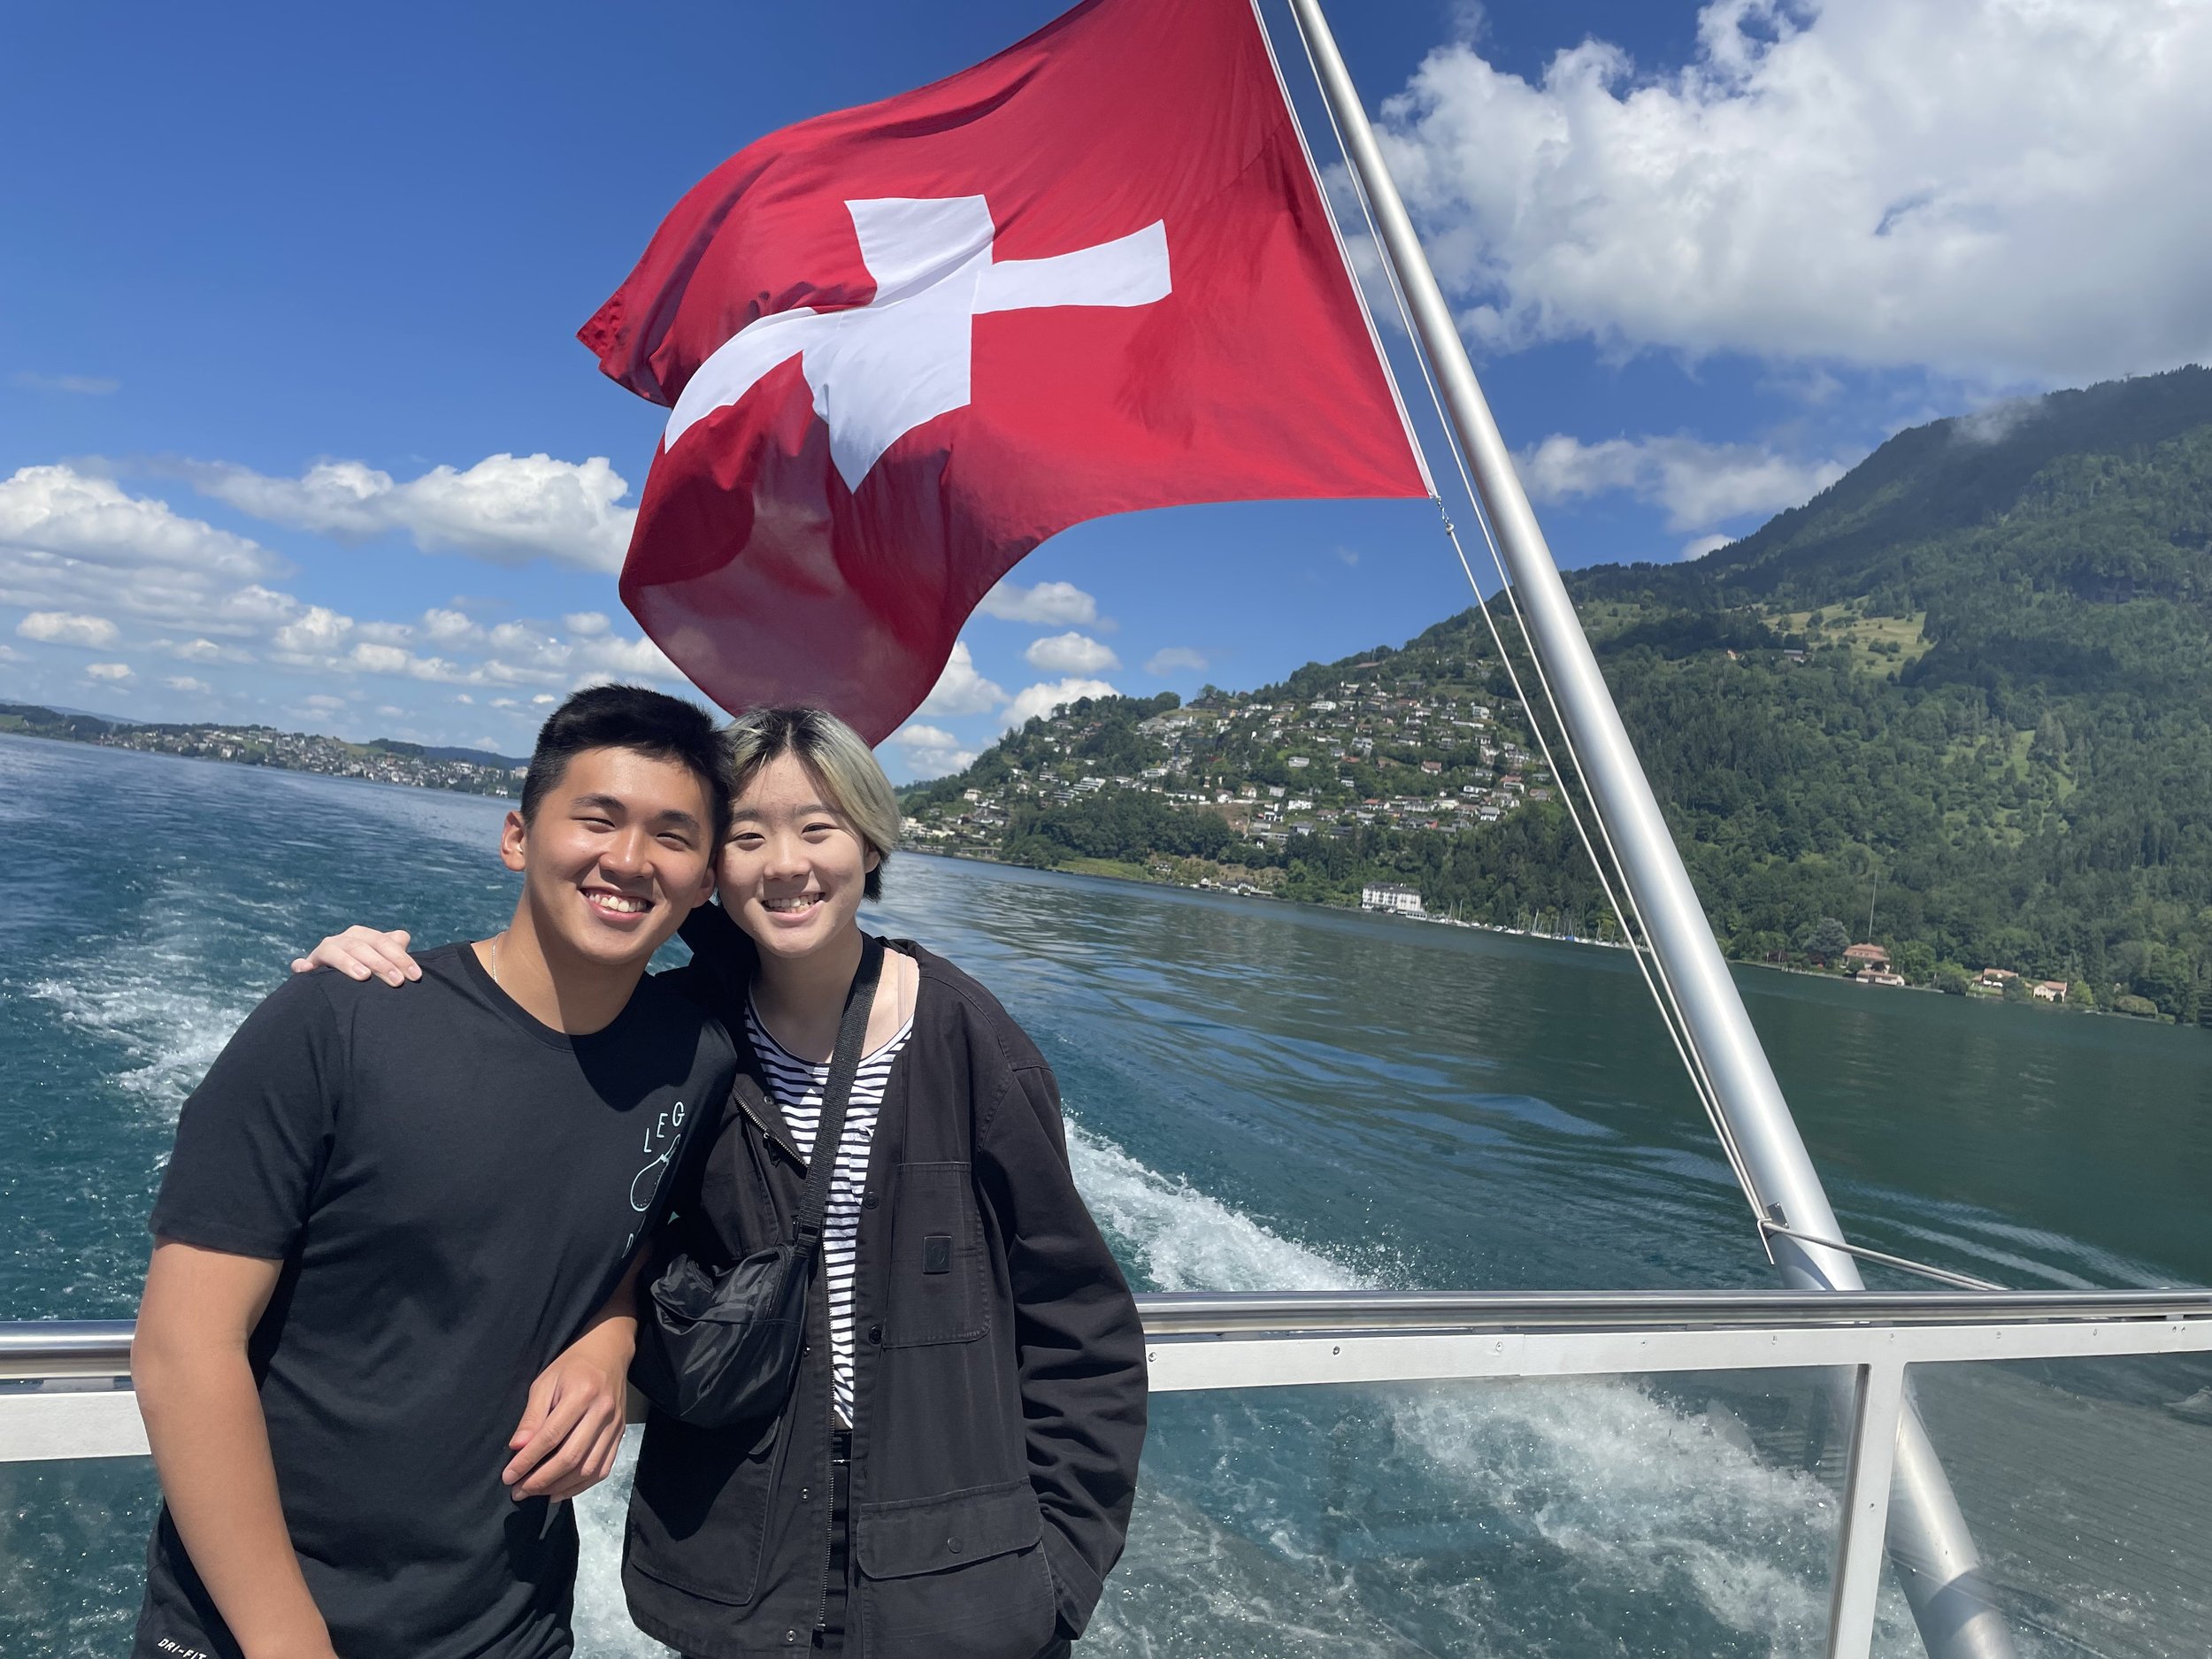  A beautiful day for a boat ride in Switzerland! 